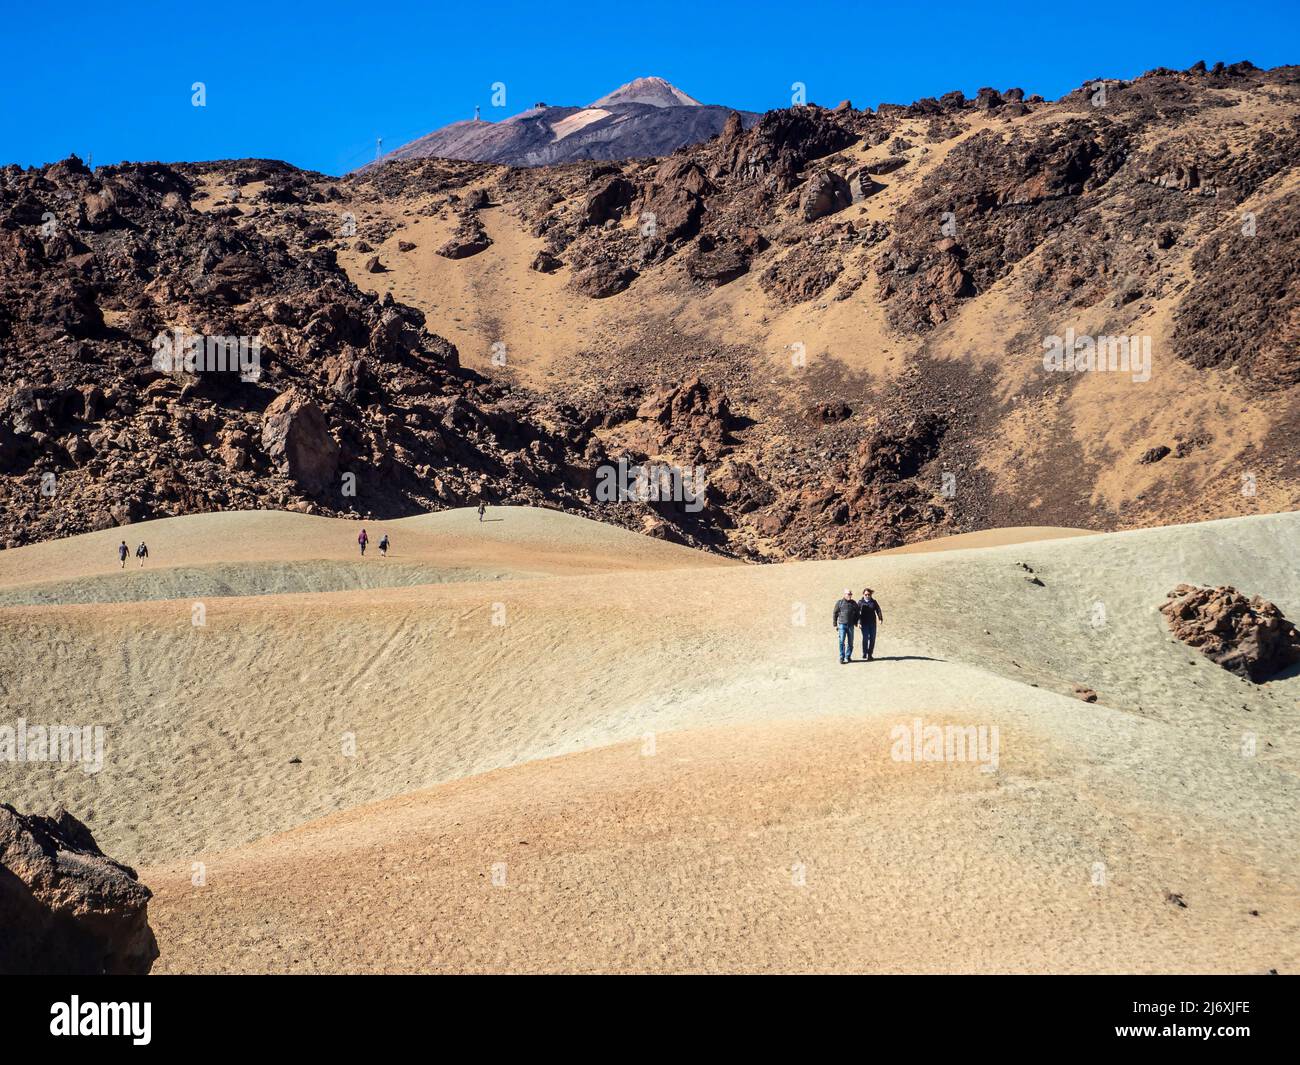 A heterosexual couple strolling through the volcanic landscape of the Teide volcano on the island of Tenerife Stock Photo